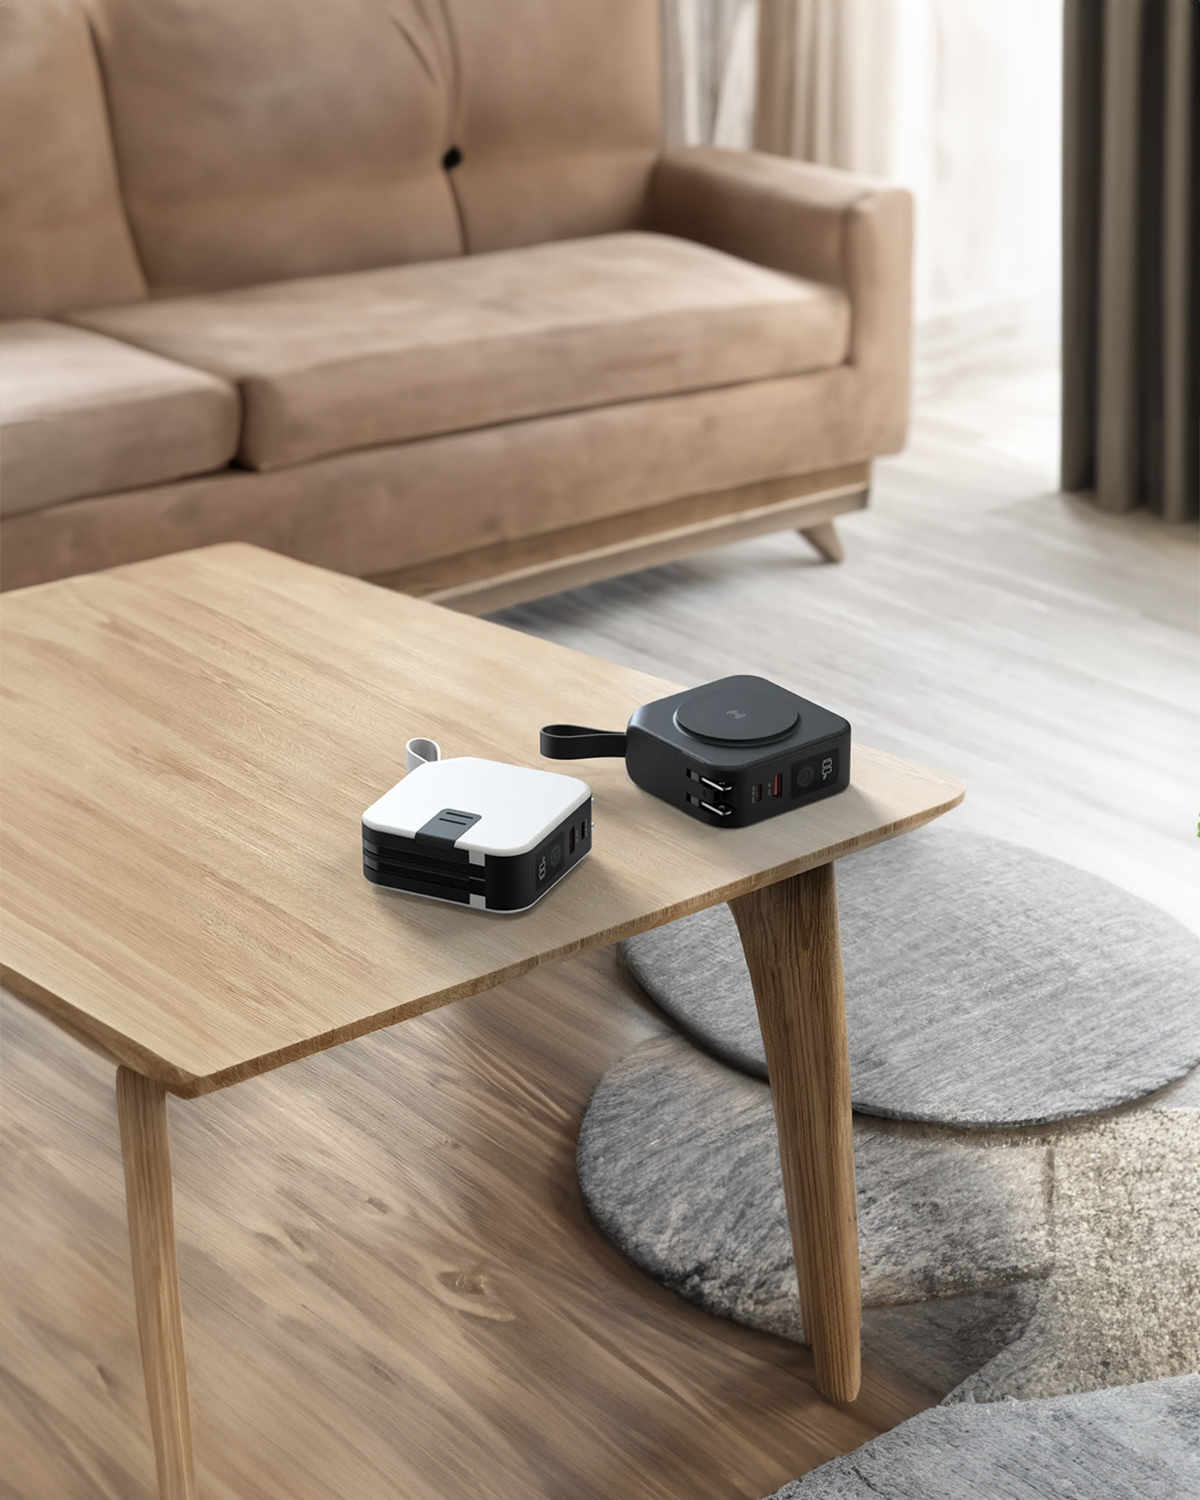 The travelcharge magnetic fast wireless powerbank charger sitting on a bench in a living room